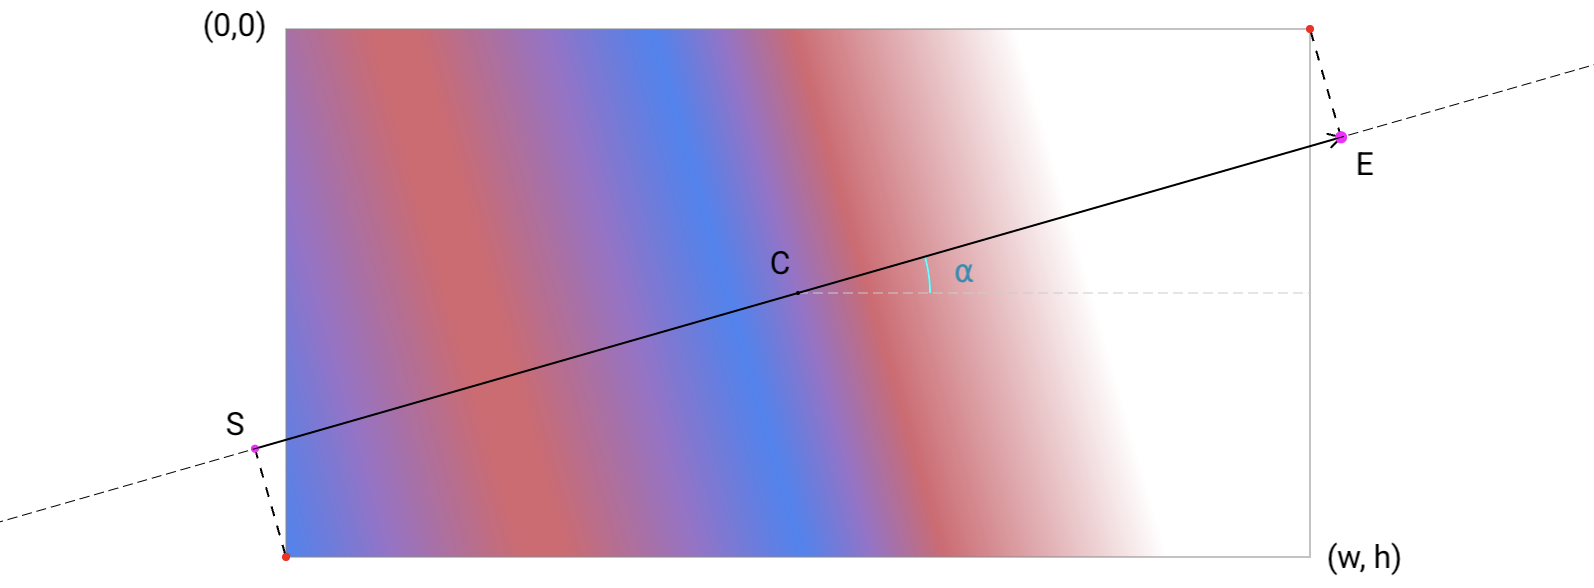 A gradient with overlaid the gradient line, the start and end points, and other information.